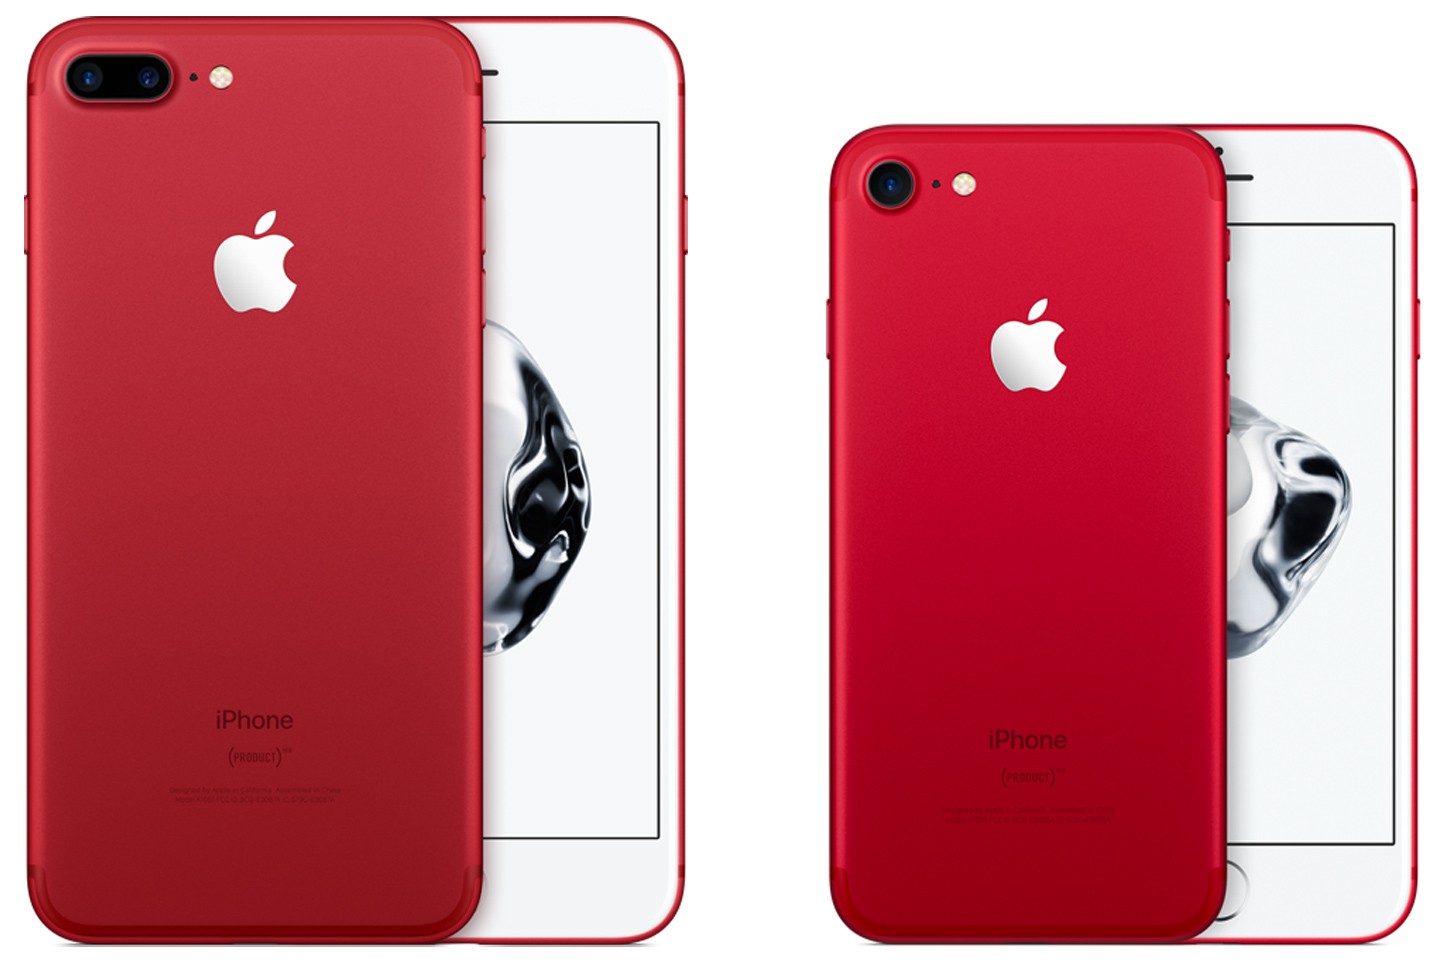 RED Special Edition iPhone 7 is coming to Three